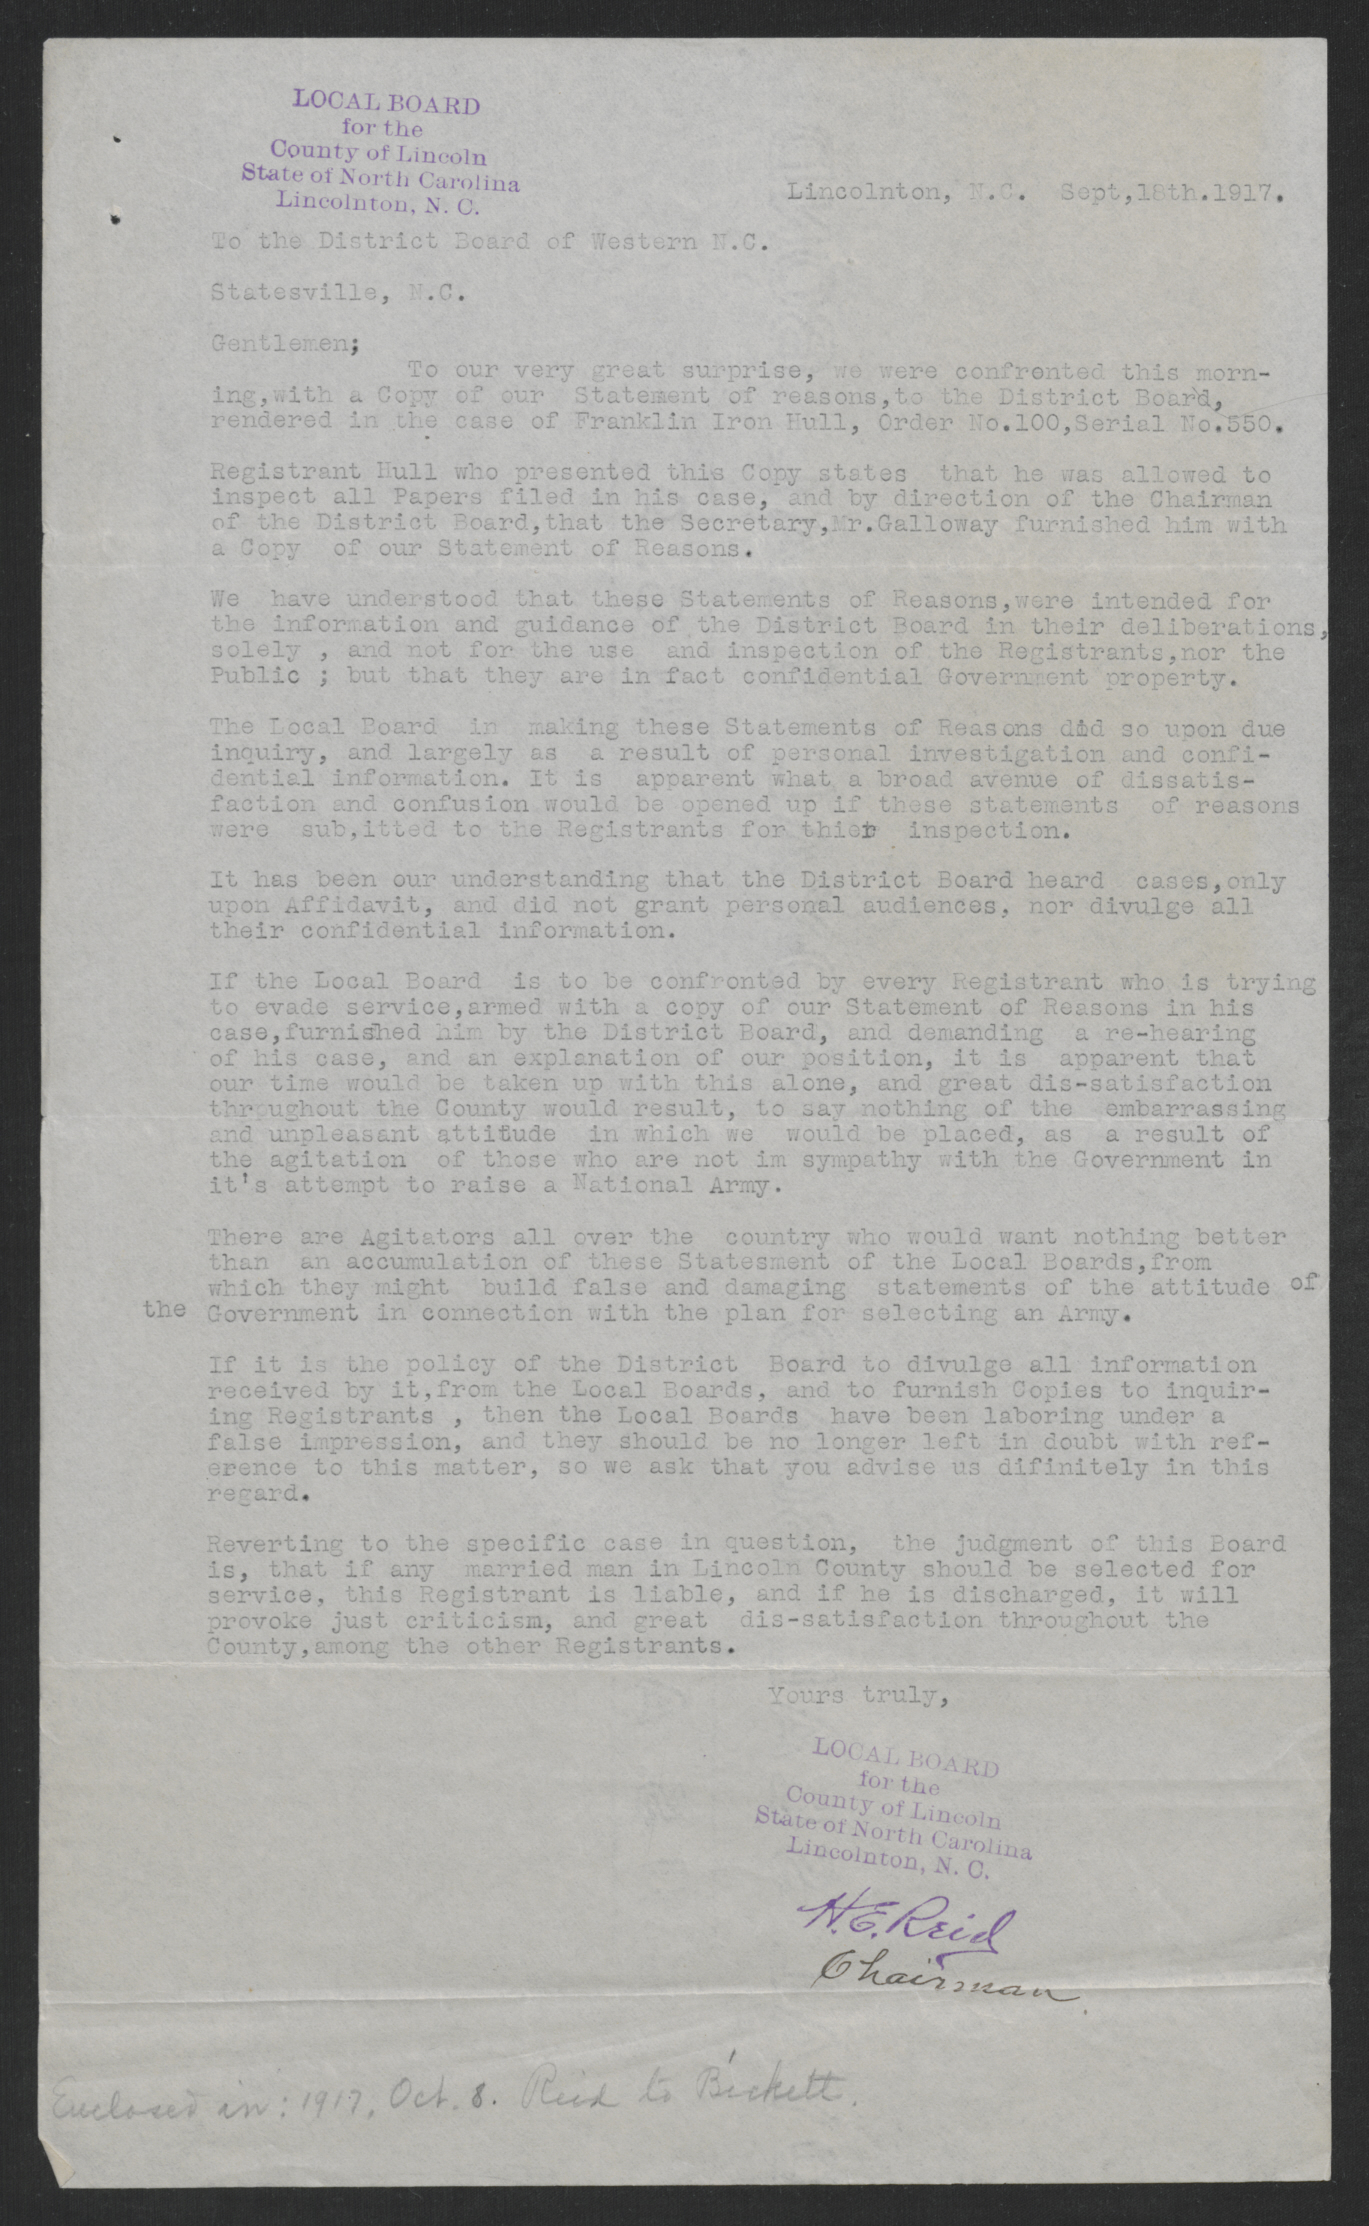 Letter from Harry E. Reid to the District Board of Western North Carolina, September 18, 1917